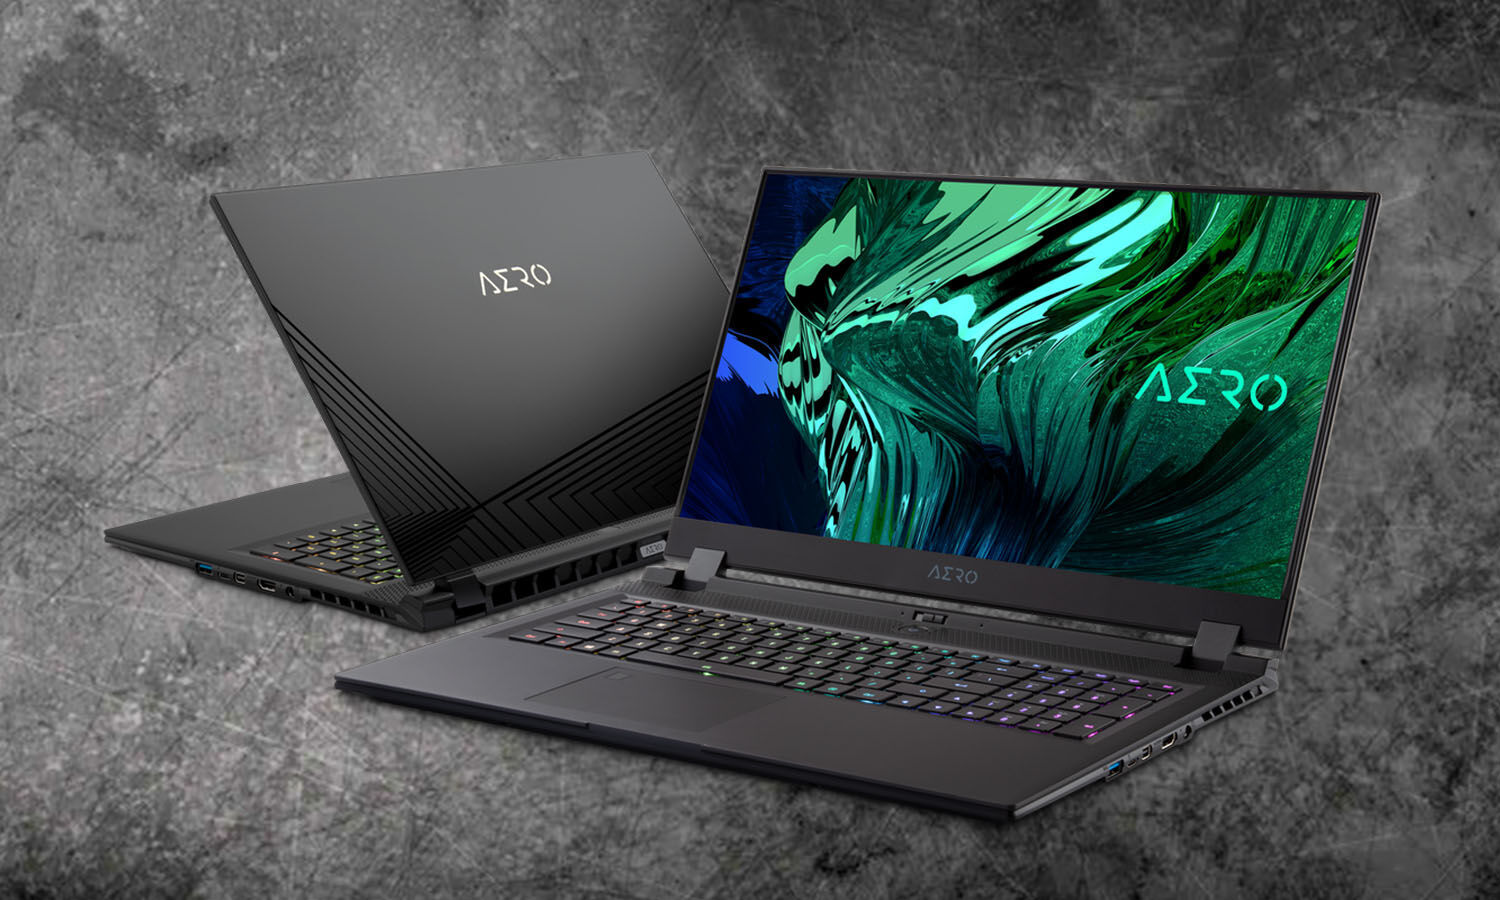 Laptop Gigabyte Aero-Aorus: Gaming laptop launched in India, know what are the powerful features and price